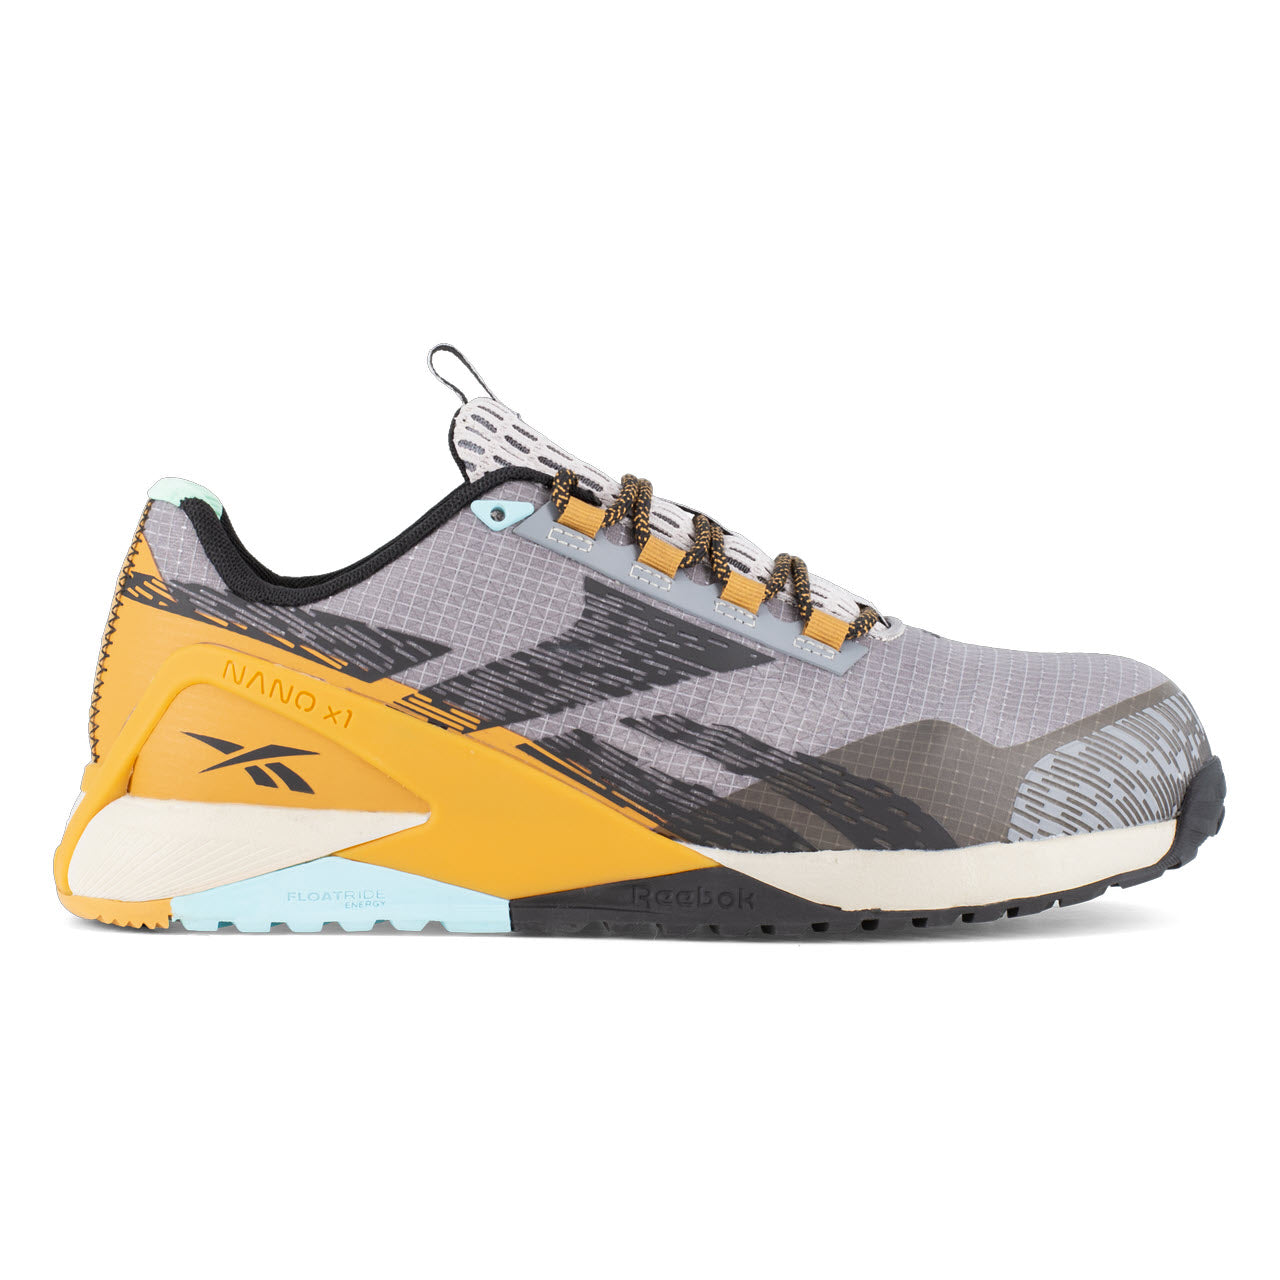 A side view of a gray and yellow athletic Reebok Nano X1 shoe with a patterned design and the Reebok brand logo, featuring a rugged sole.